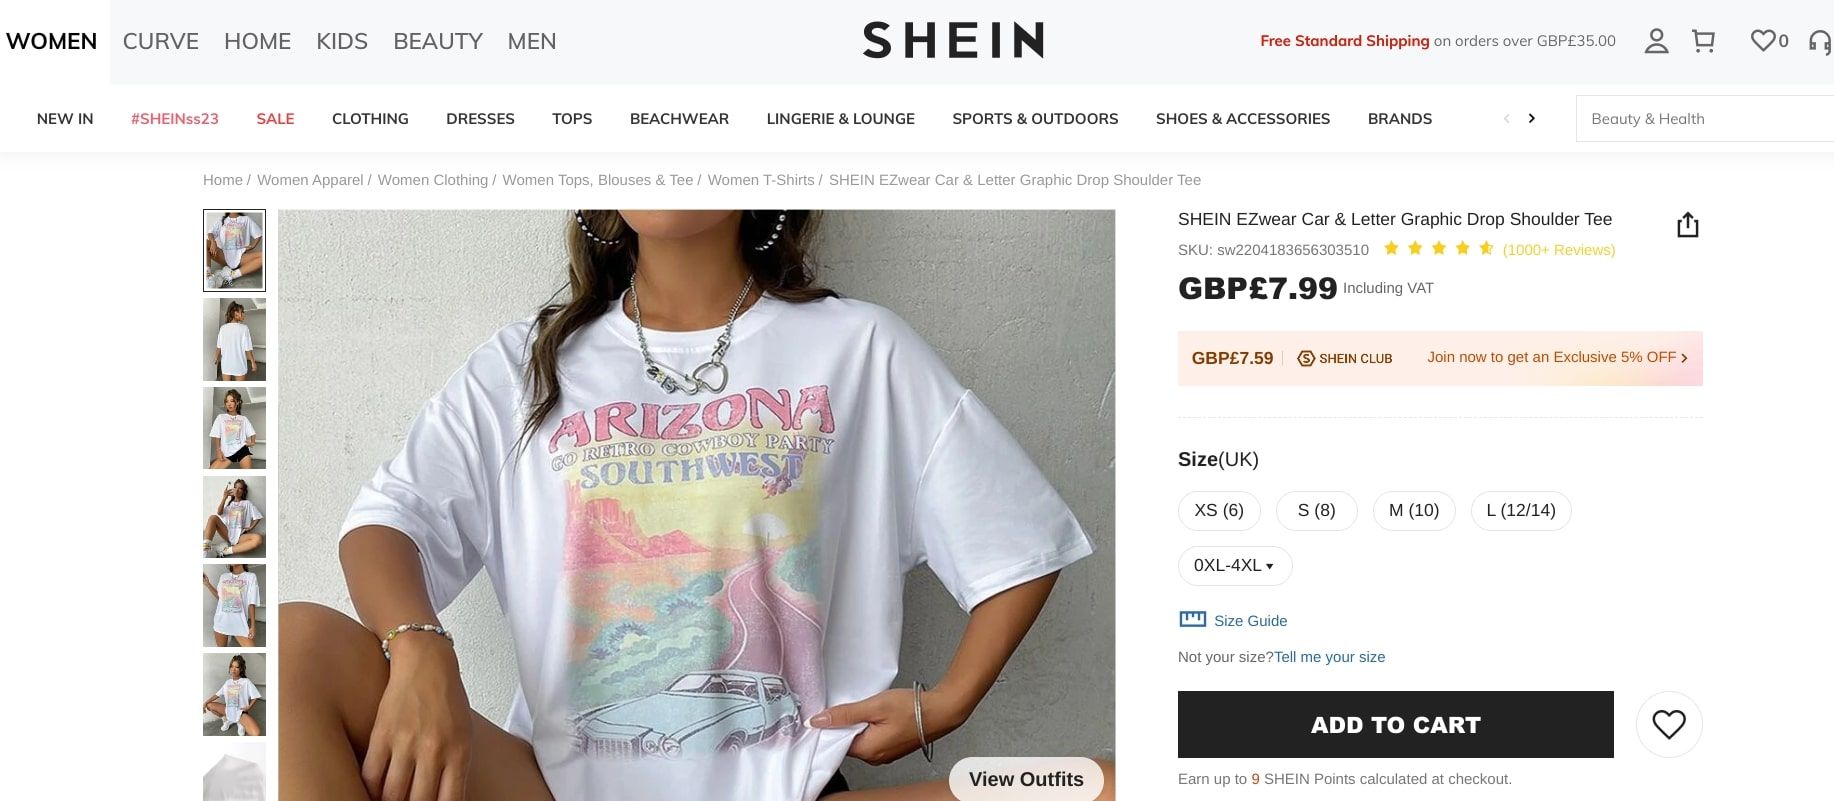 Collectionssale.com Review: A Fake SHEIN Women Clearance Scam